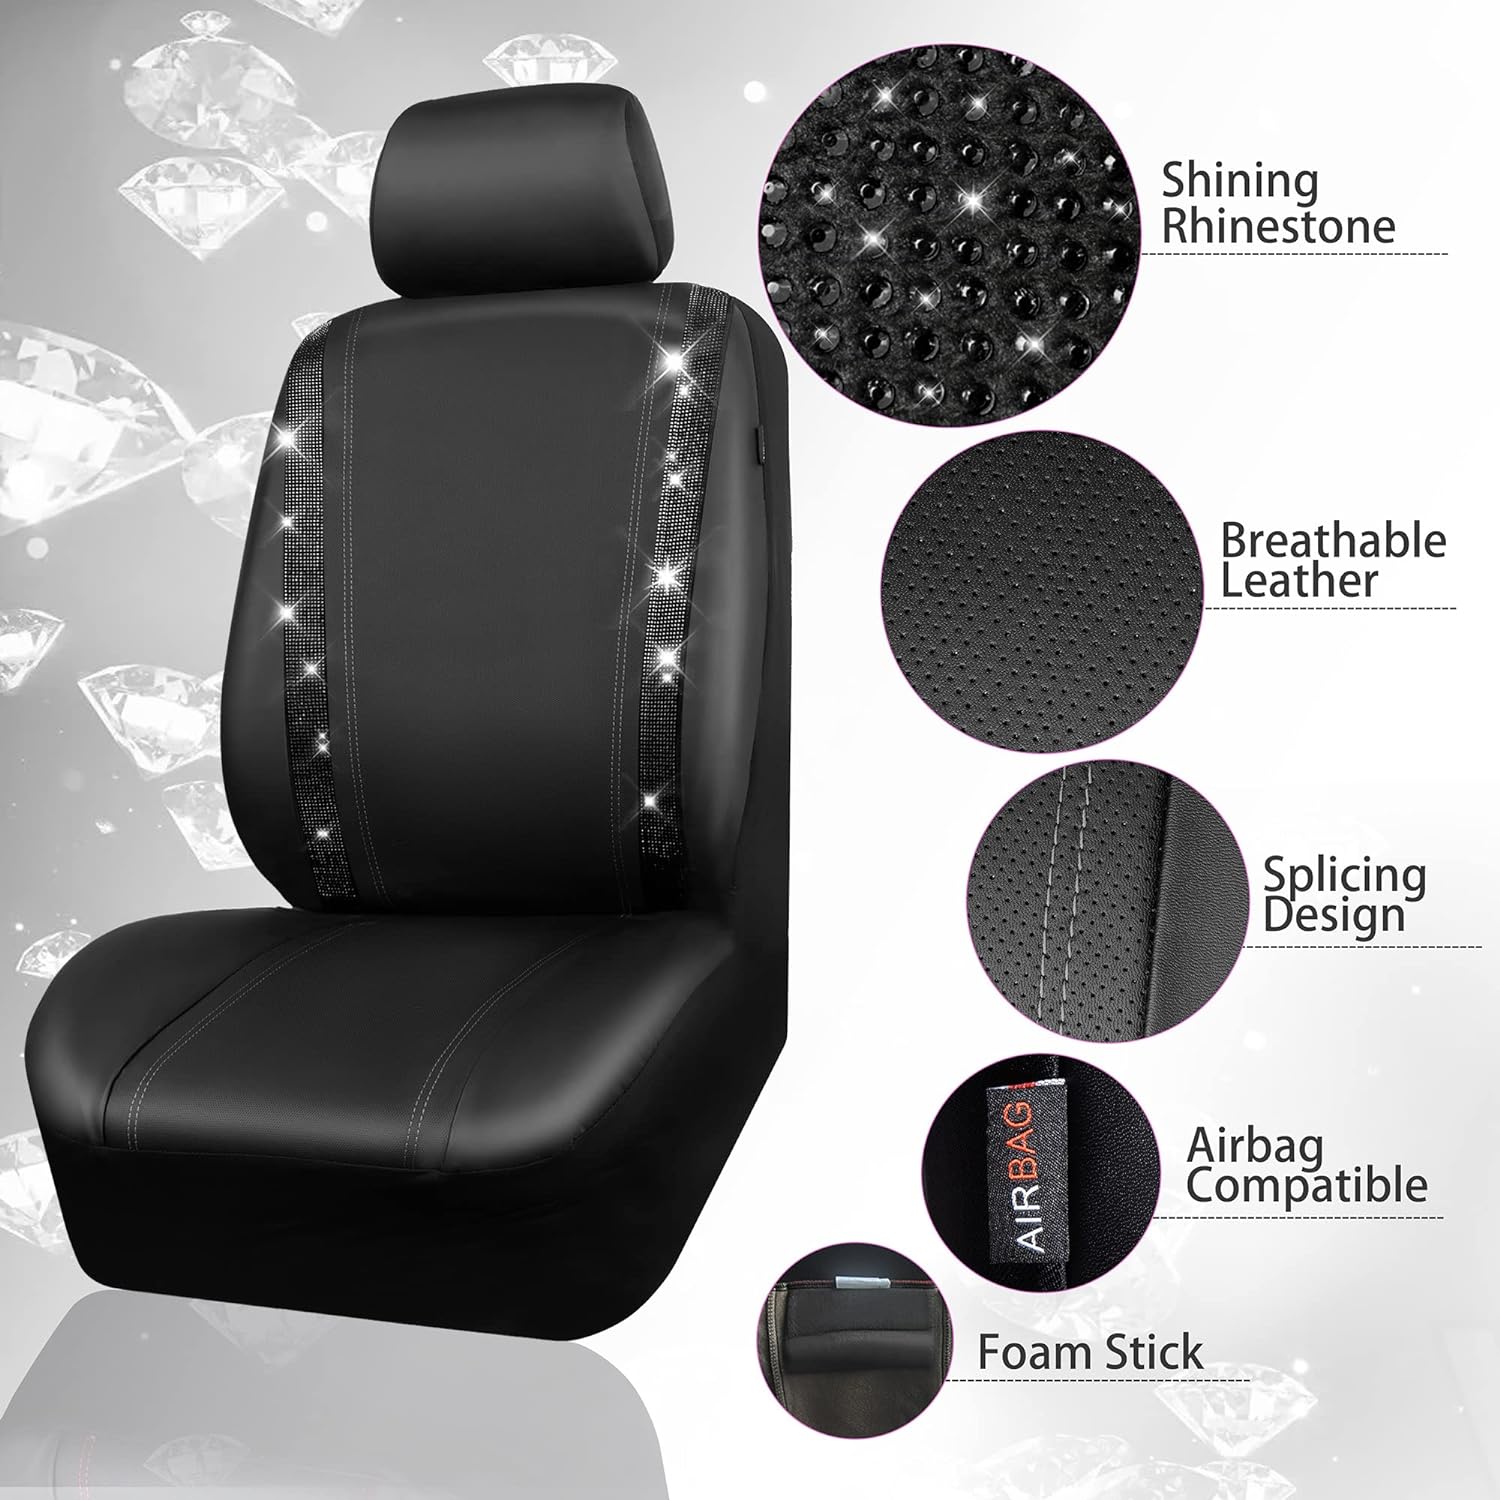 CAR PASS Bling Diamond Leather Steering Wheel Cover, Two Front Car Seat Covers, Back Seat Cover, Car Floor Mats